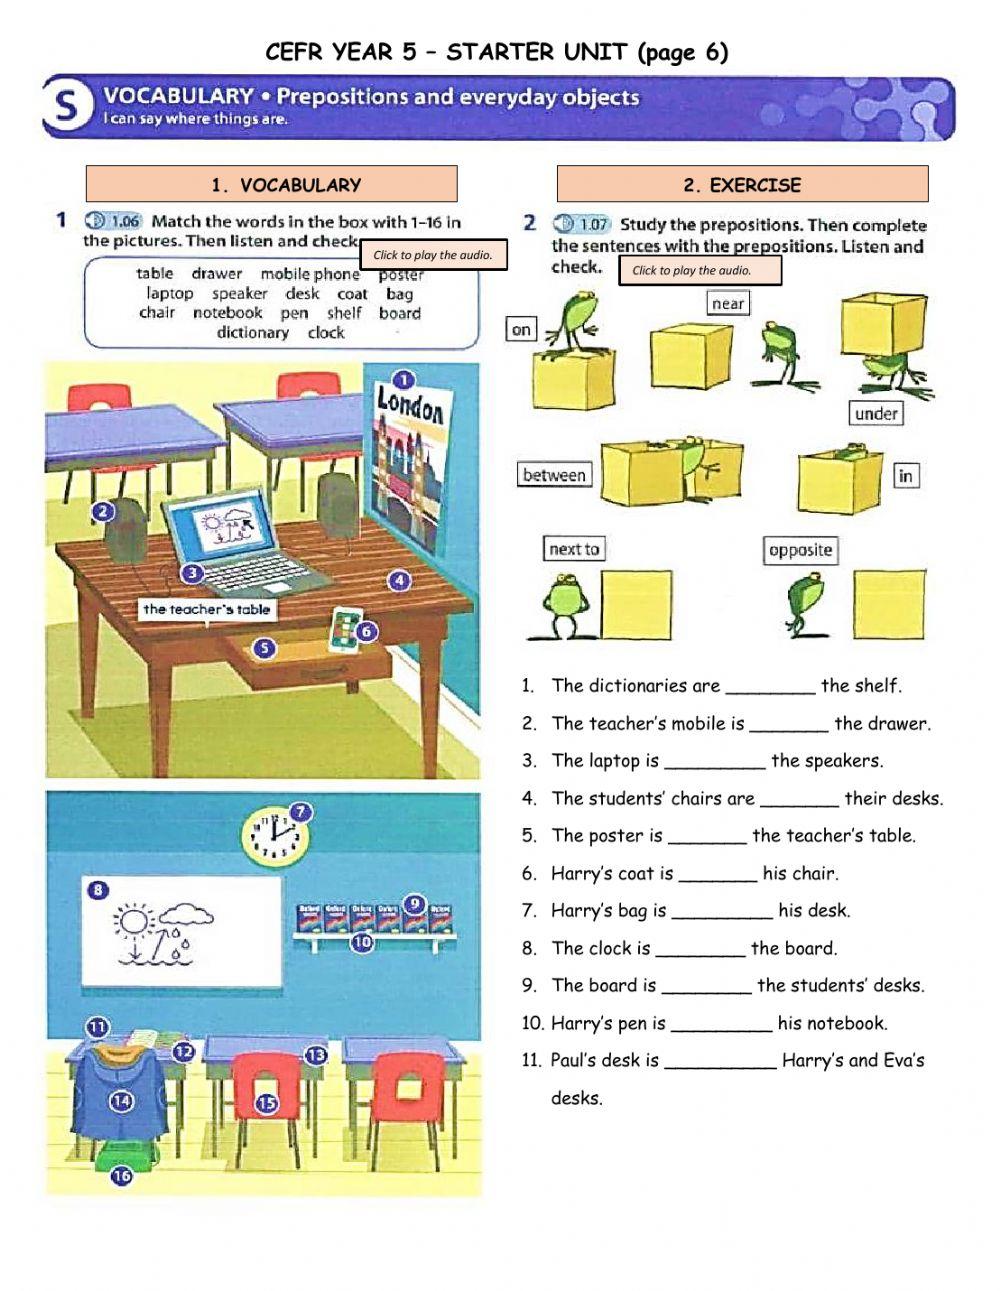 CEFR Year 5 Starter Unit - Prepositions (page 6)